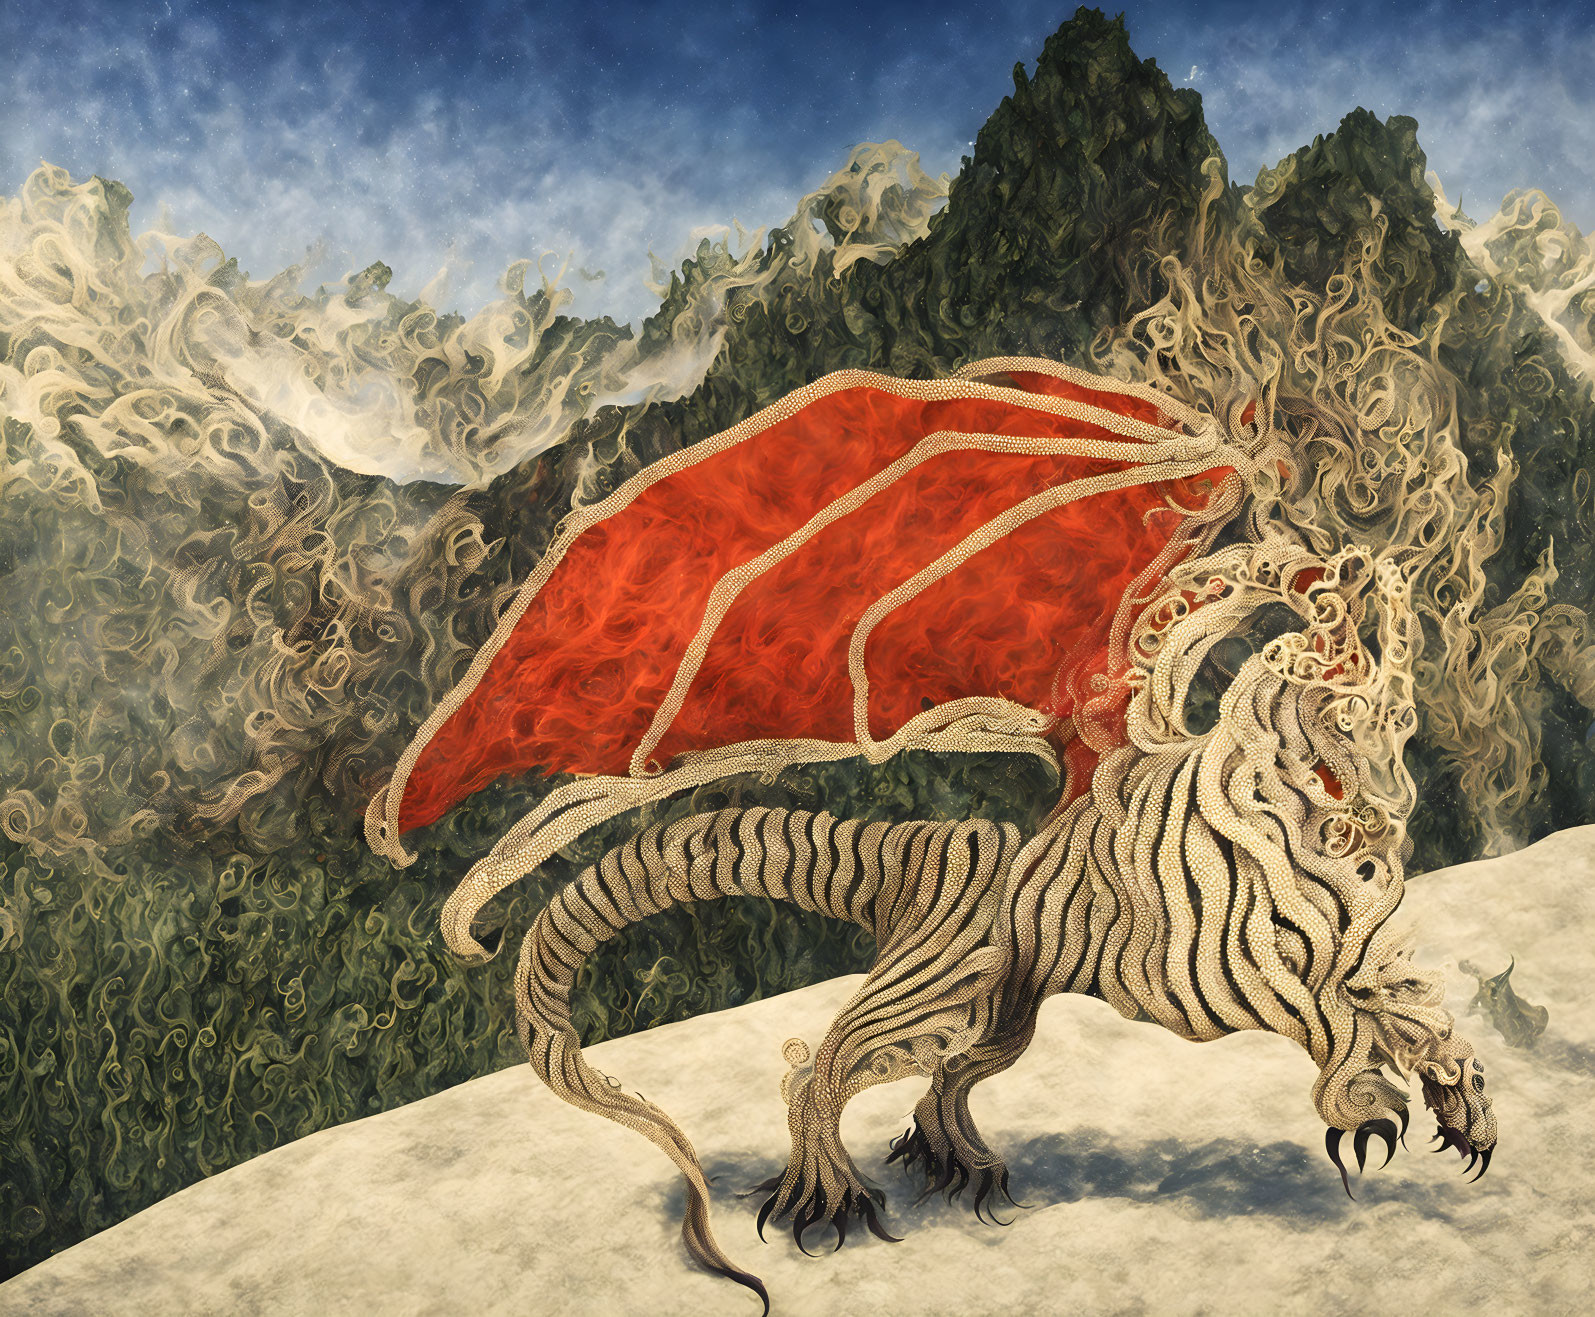 White winged dragon on cliff with green mountains and swirling clouds